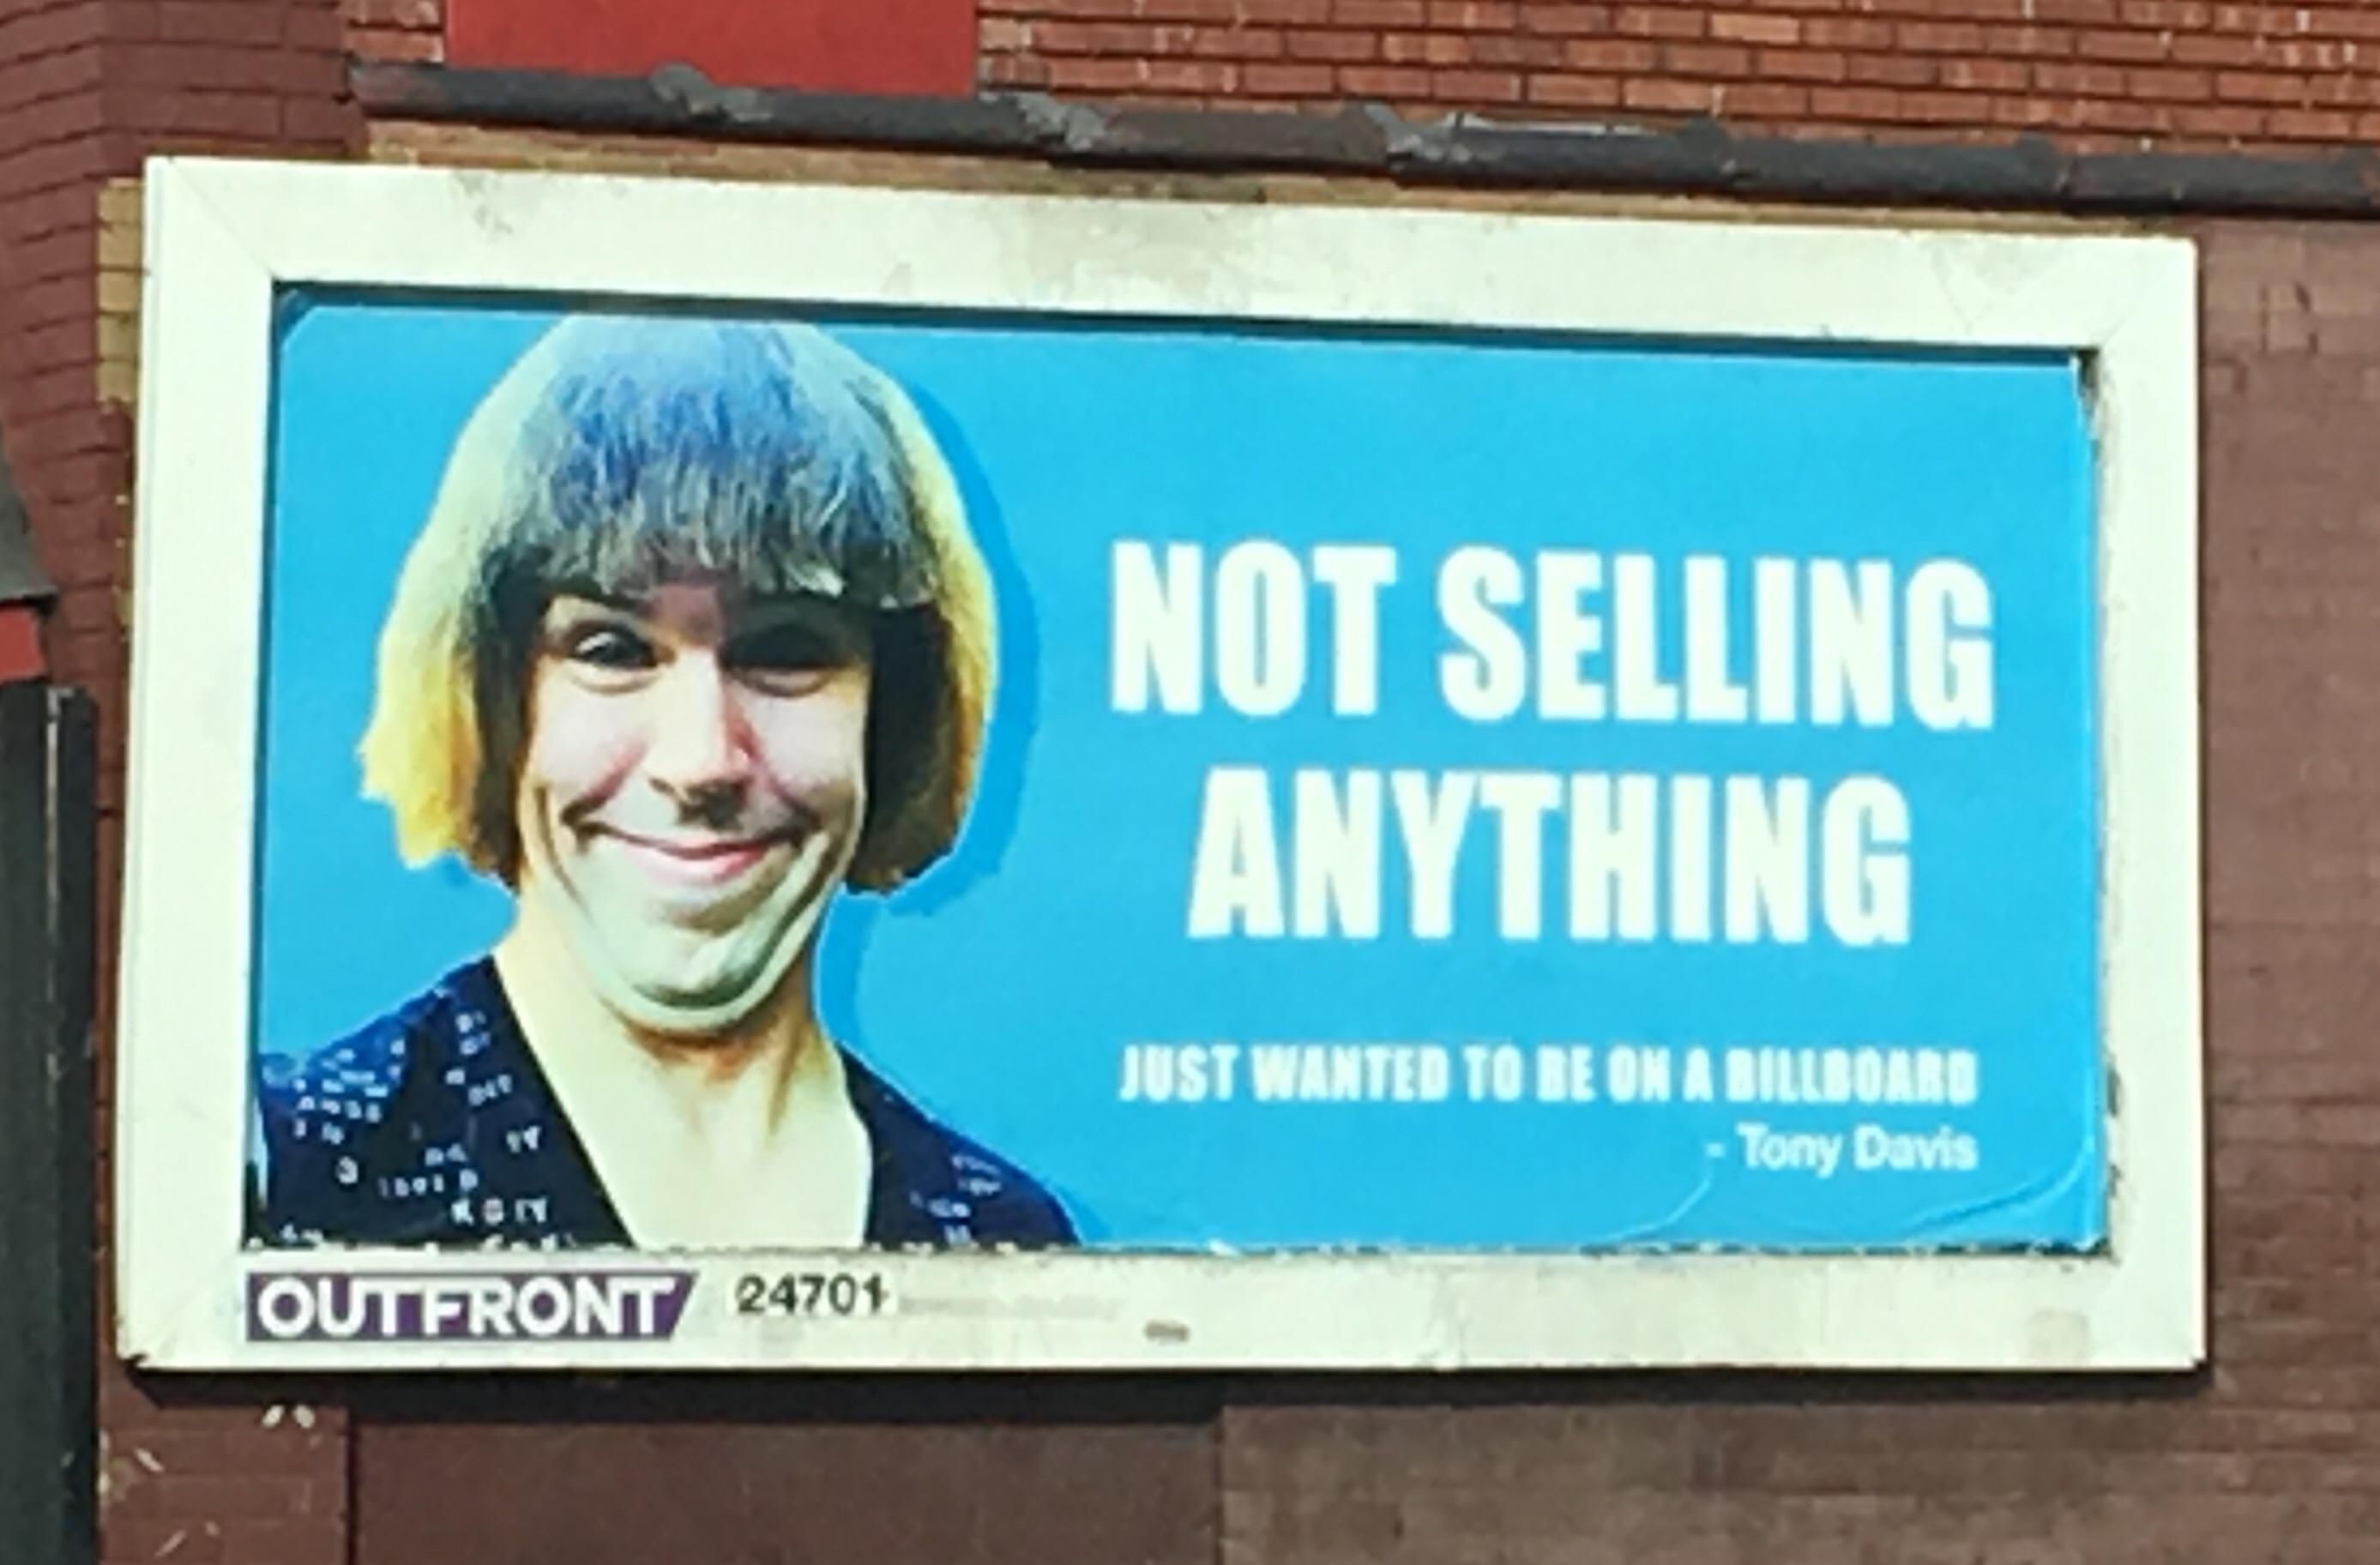 Saw this billboard coming home from work...